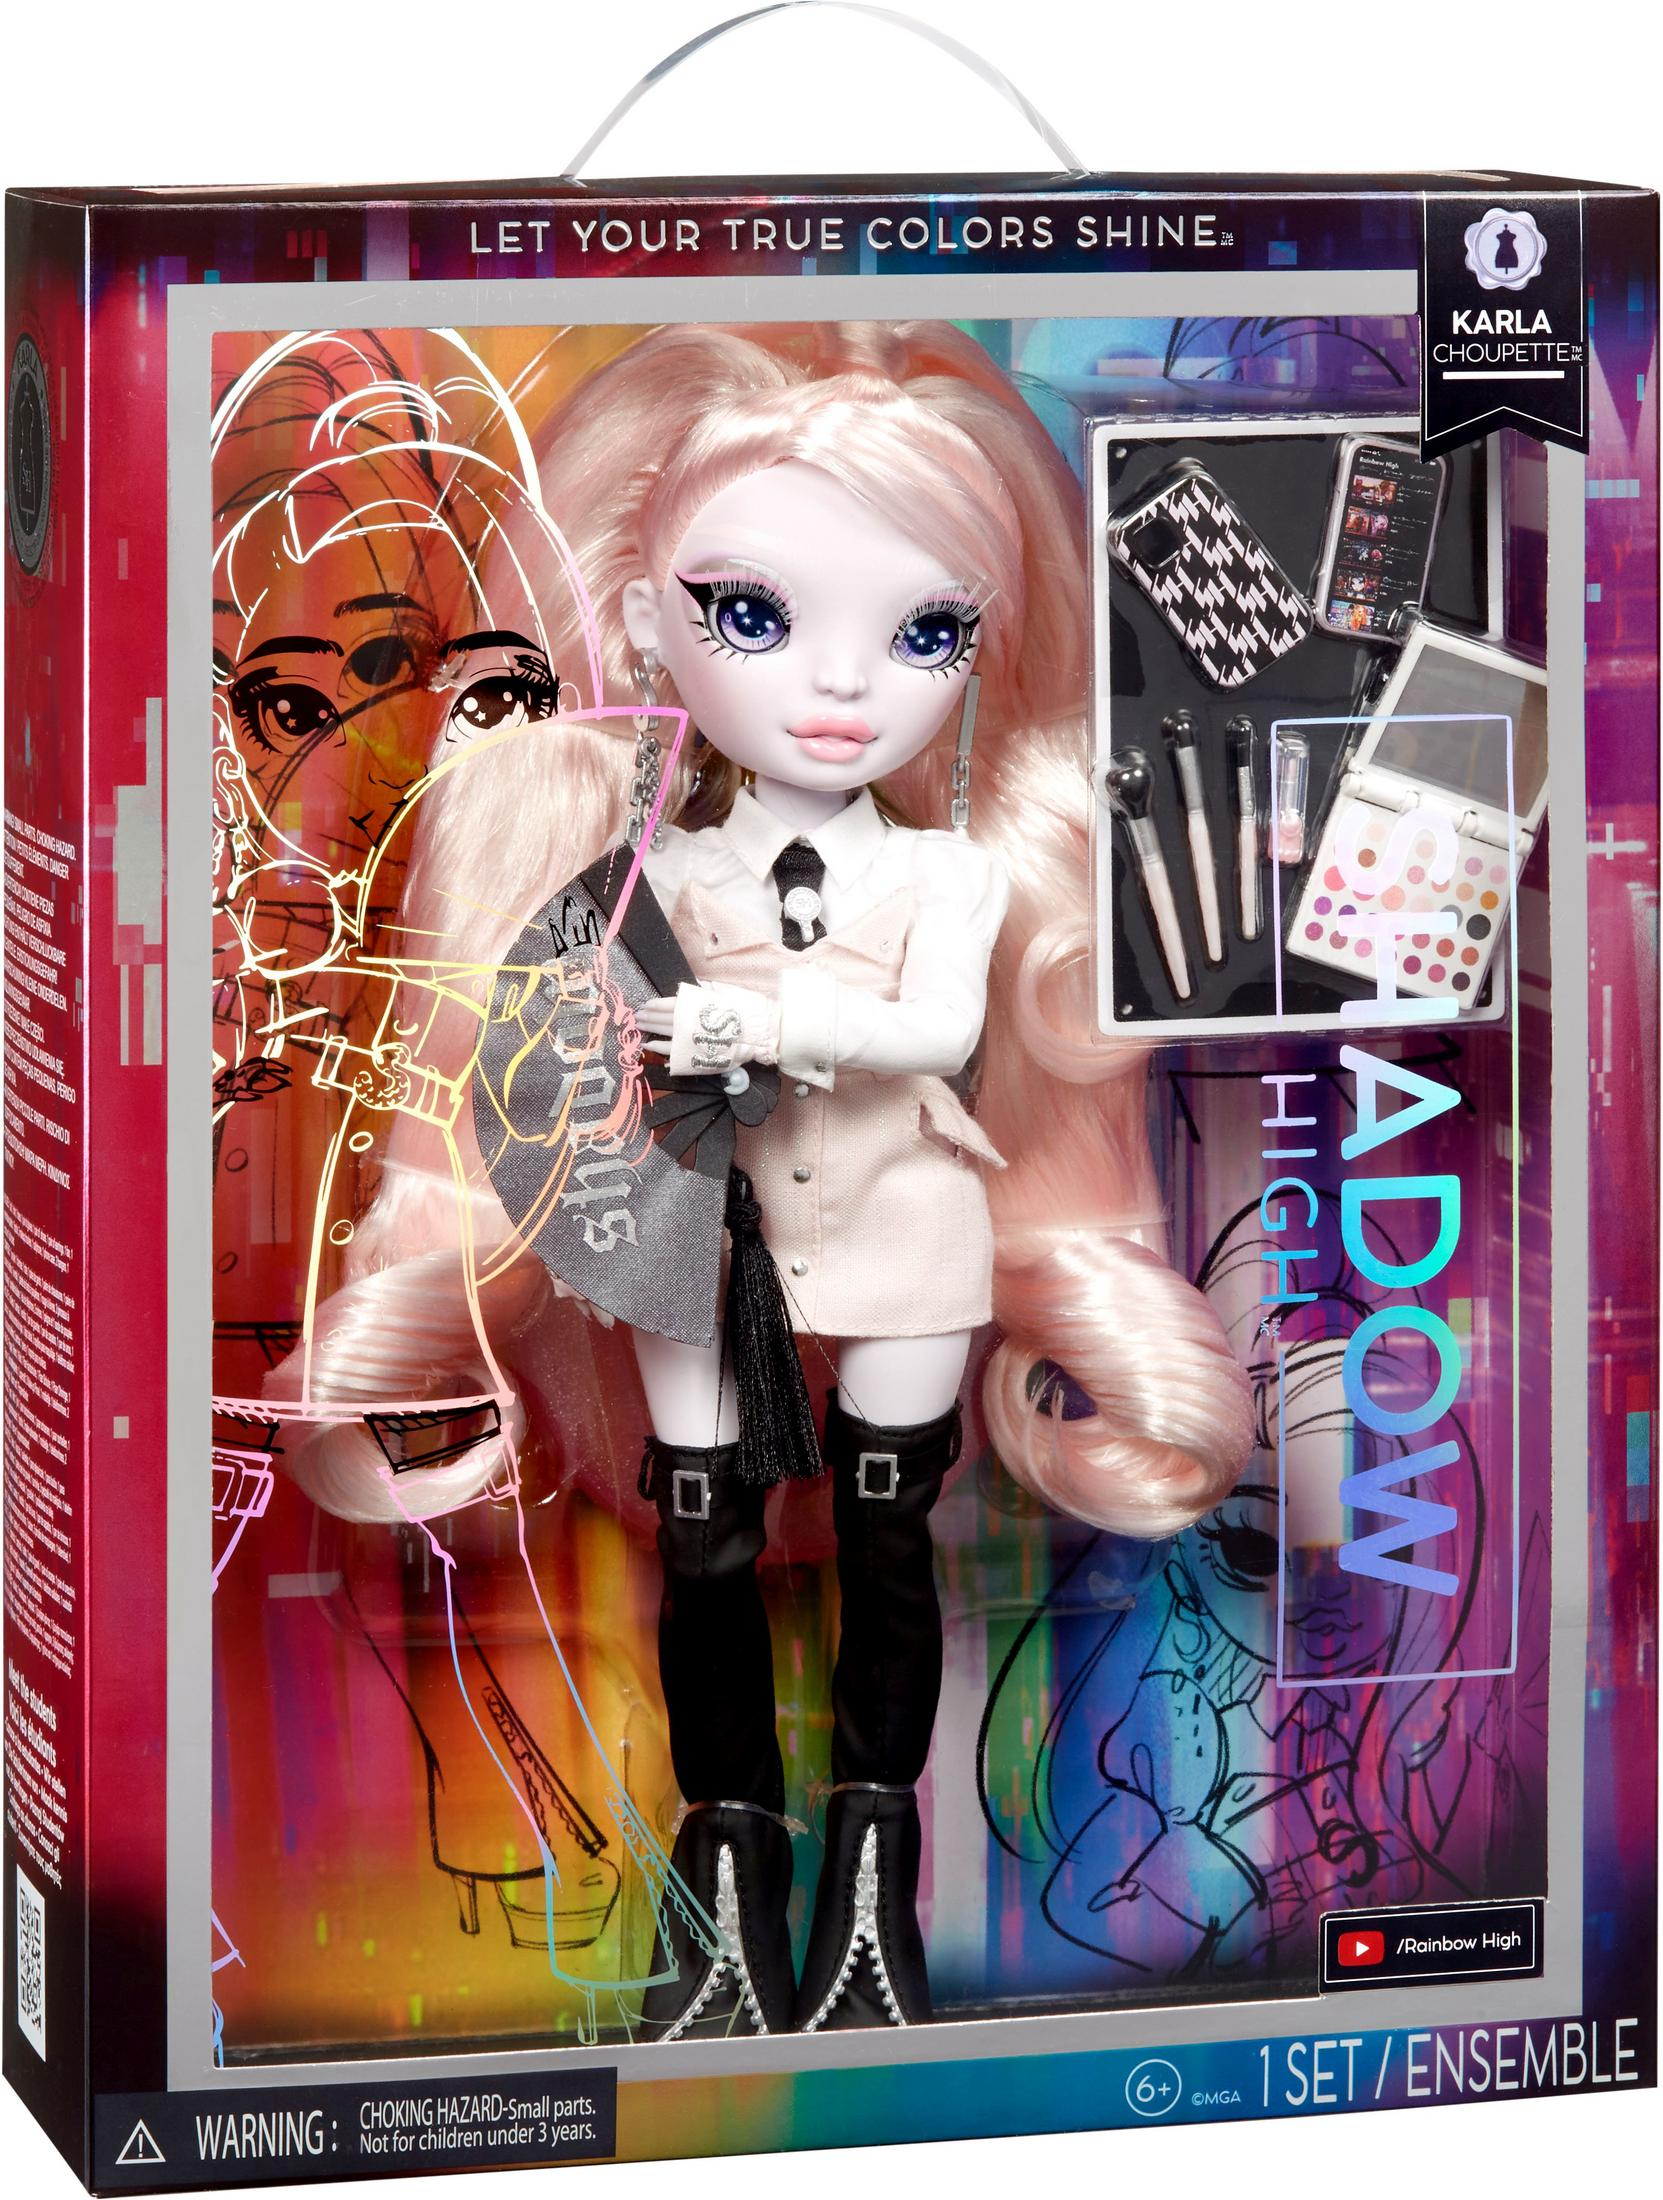 CARAMEL 583042 Spielzeugpuppe MGA Rosa 8X26.5G HIGH ENTERTAINMENT DOLL-IP (PINK) FASHION